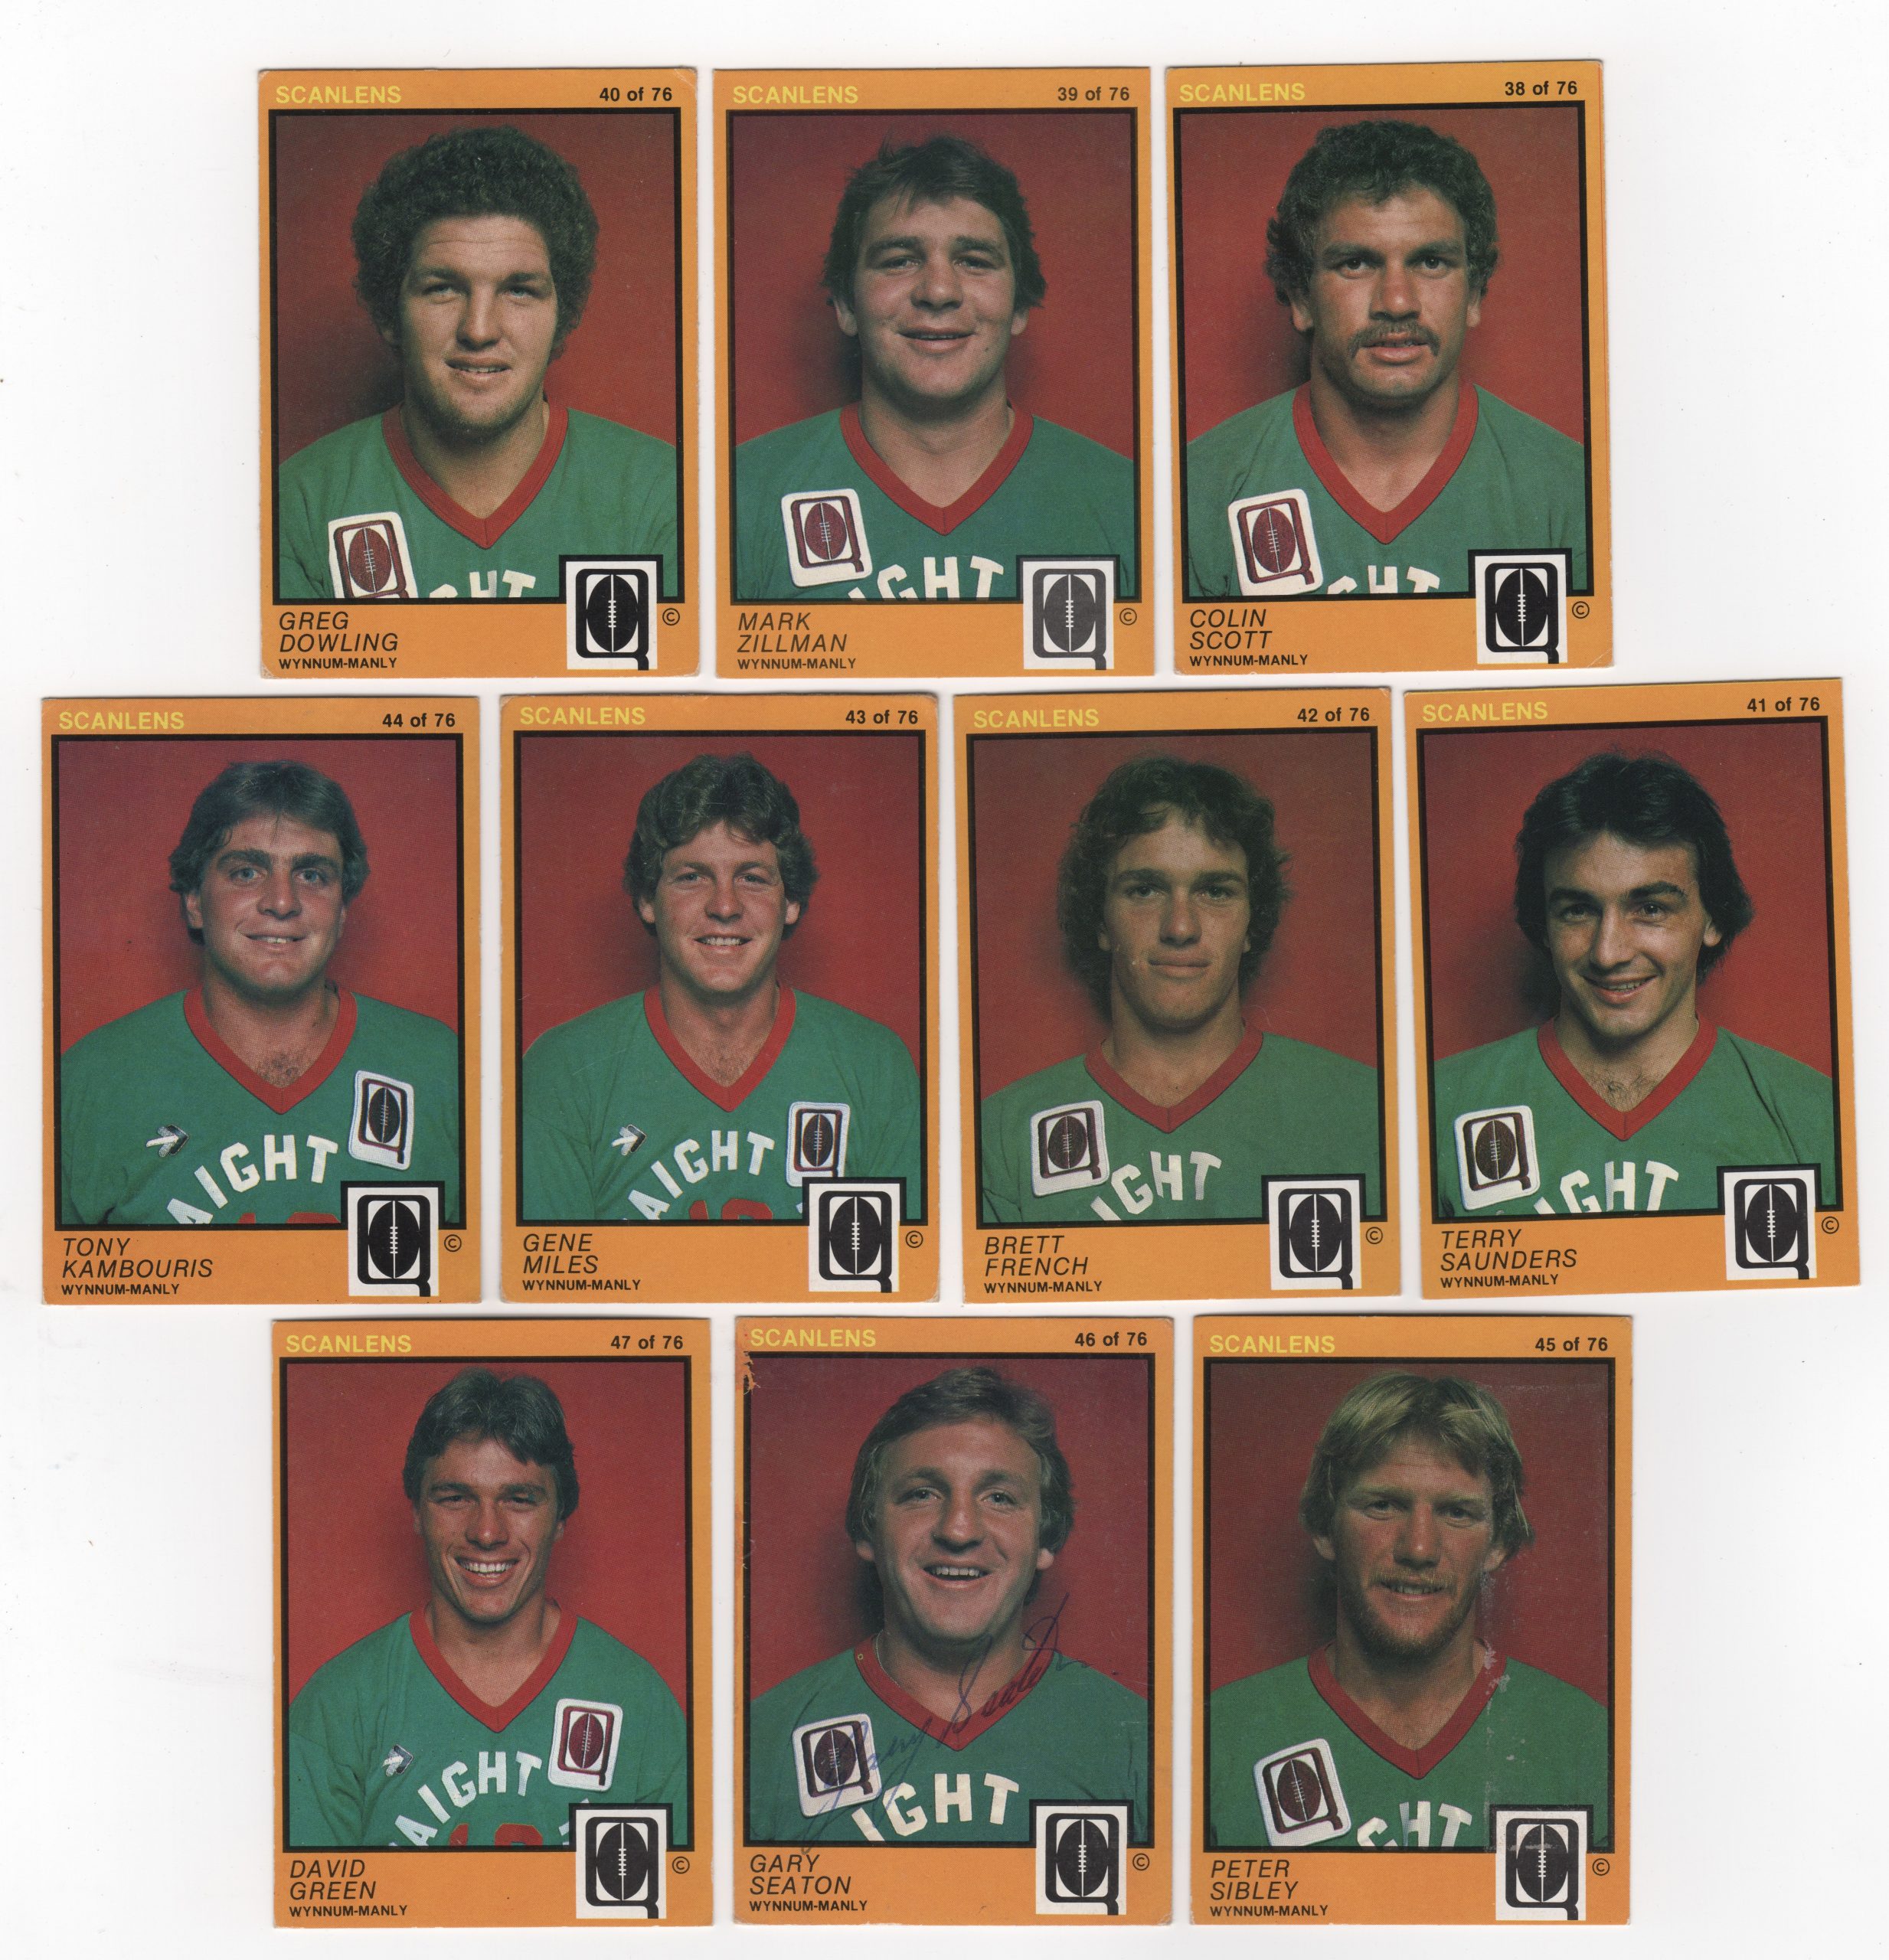 1982 Scanlens Rugby League Trading Cards